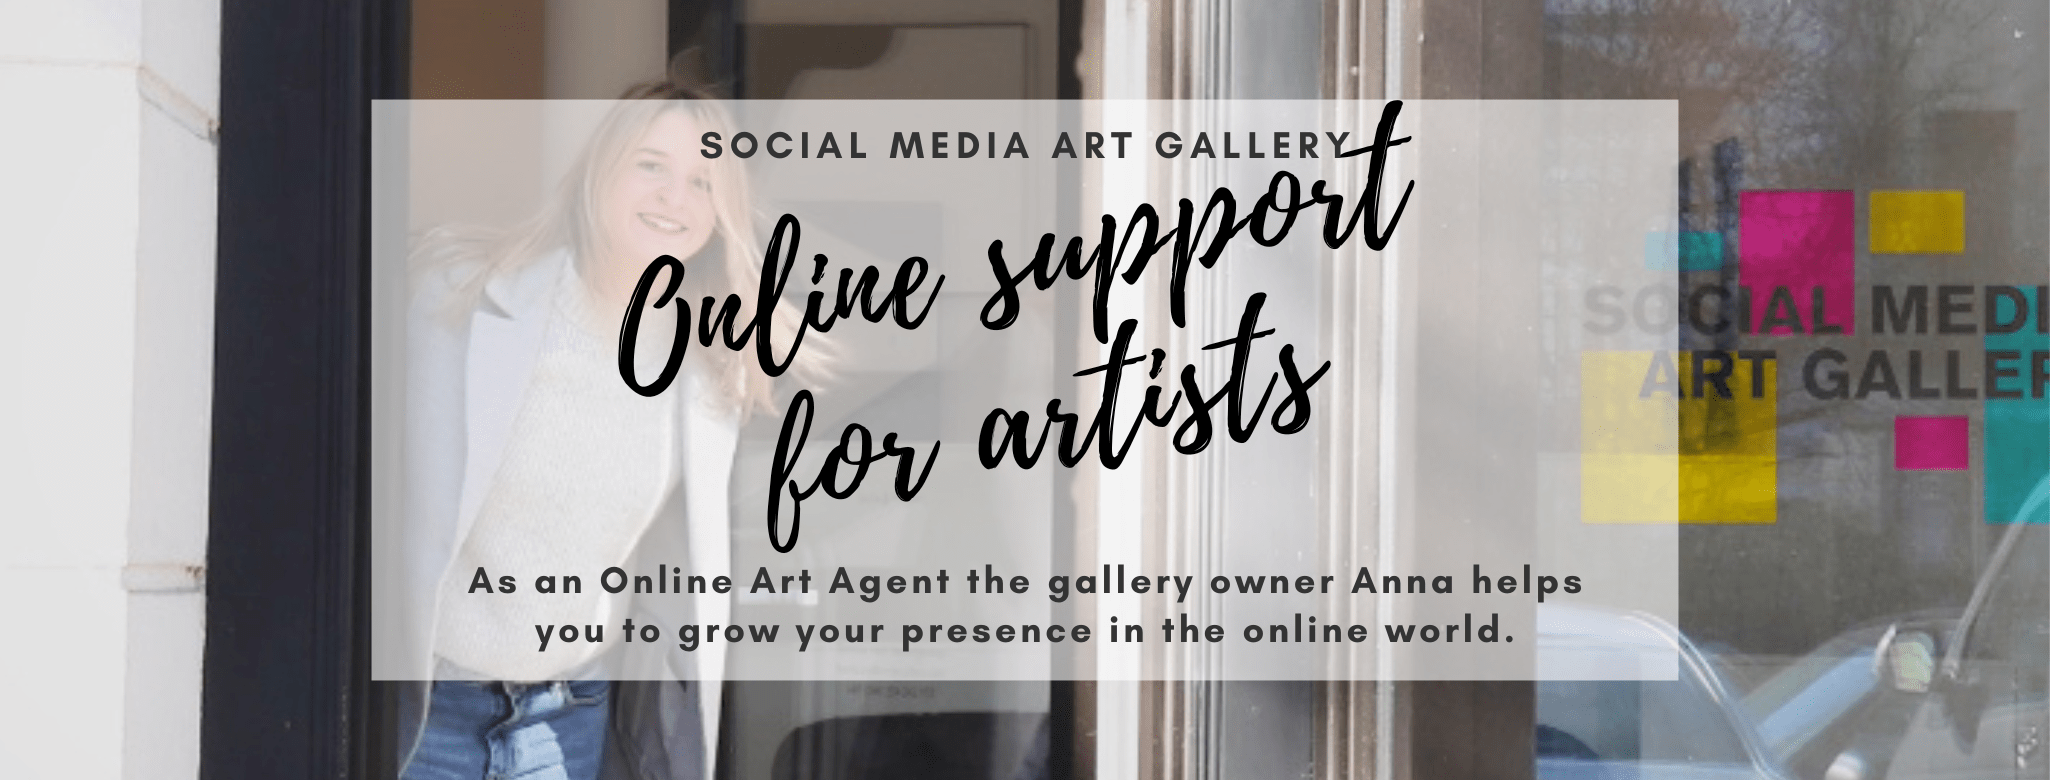 Online support for artists through art agent Anna from the Social Media Art Gallery